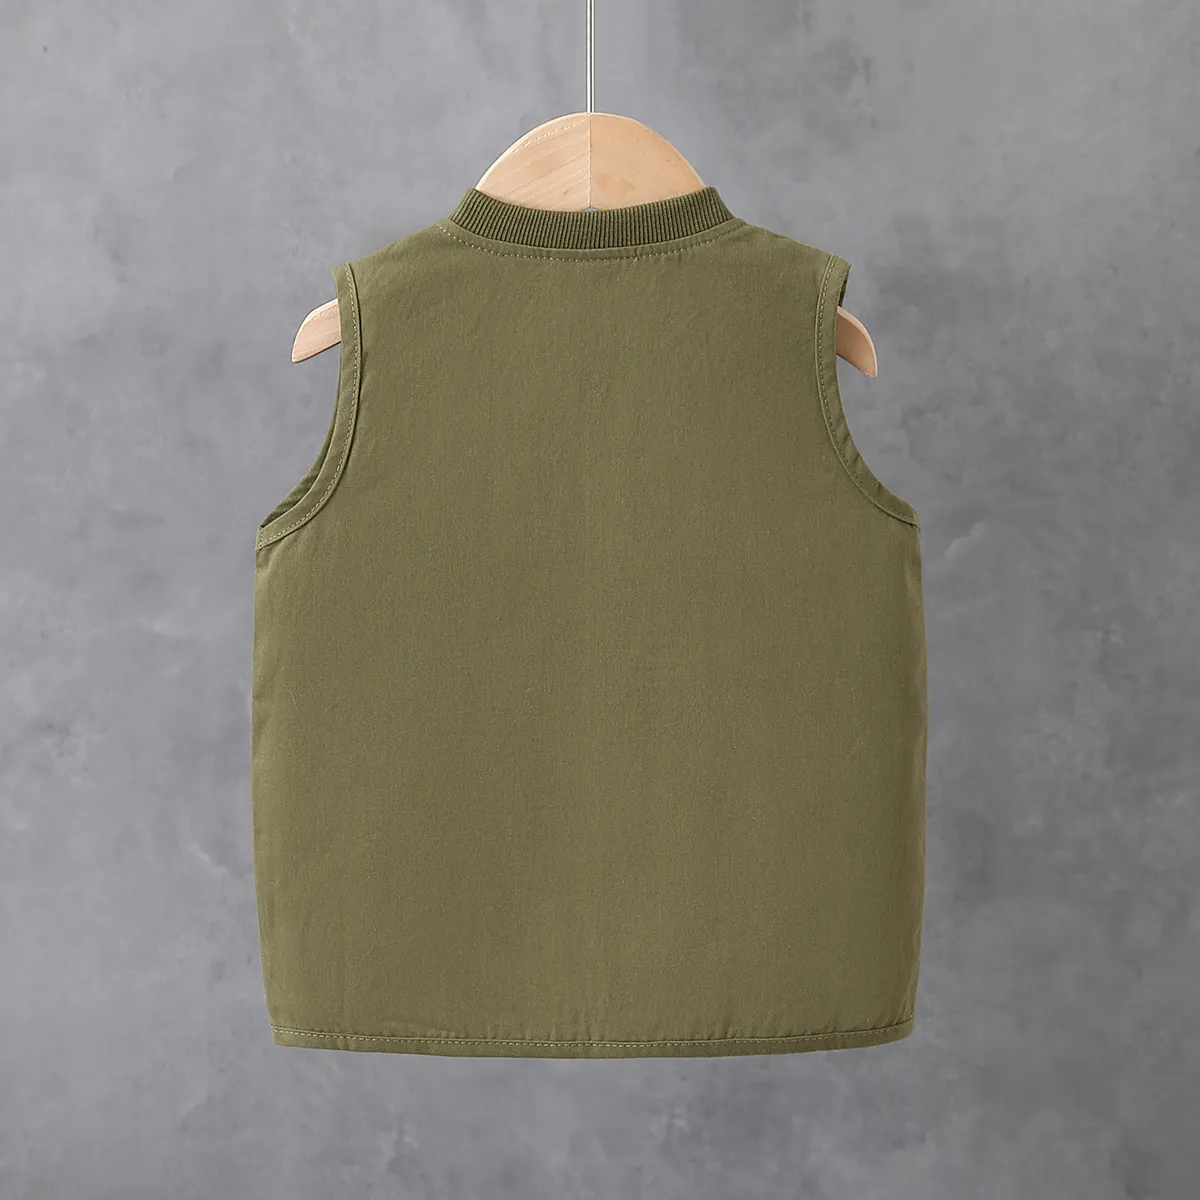 Casual Boy's Cotton Vest with Zipper, 1pcs, Regular Fit - Toddler Tops Army green big image 1